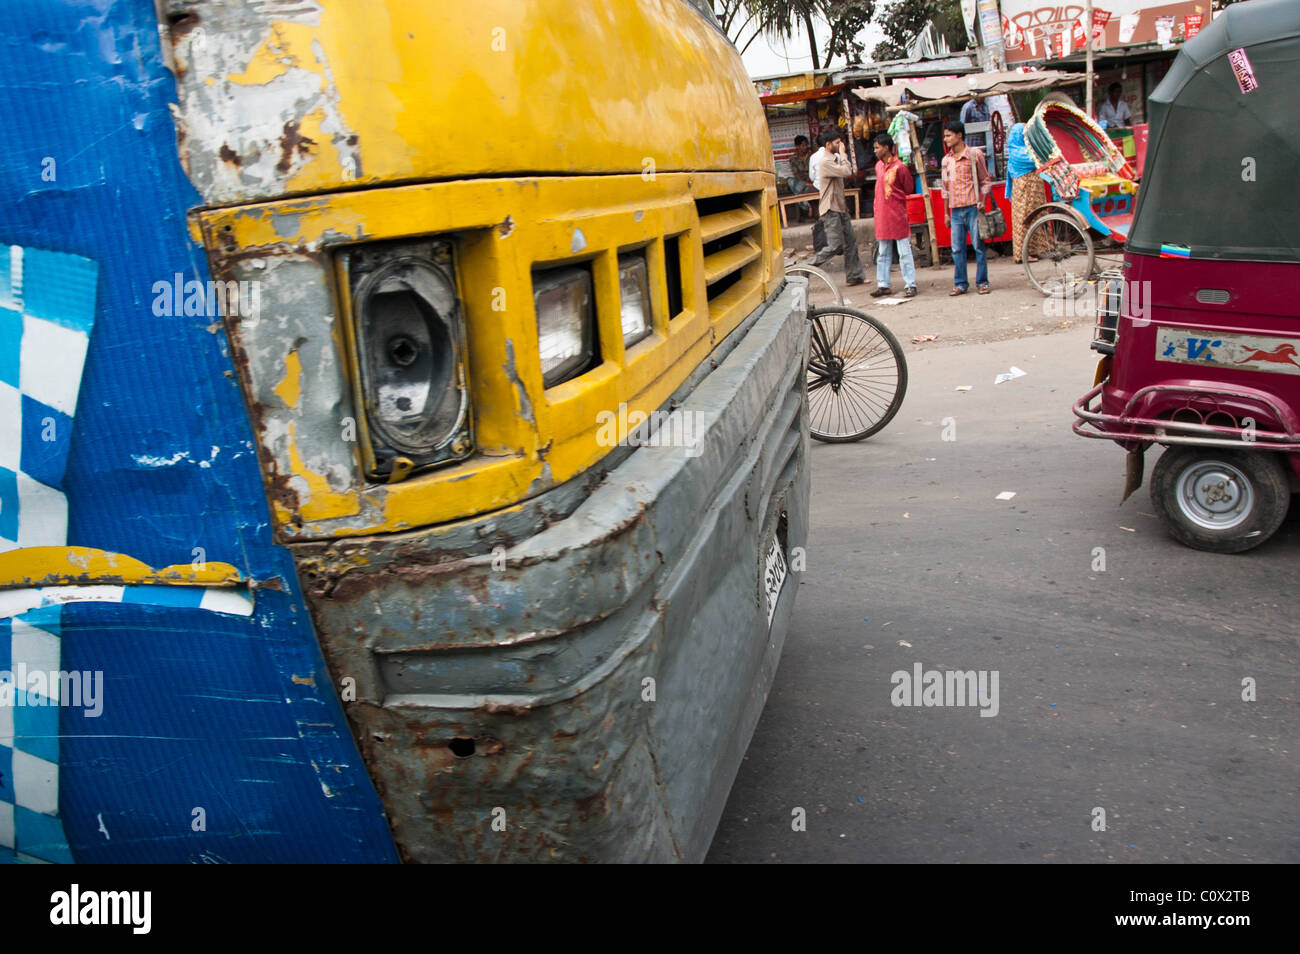 The front of a battered Bangladeshi bus, in the middle of a Dhaka street scene Stock Photo